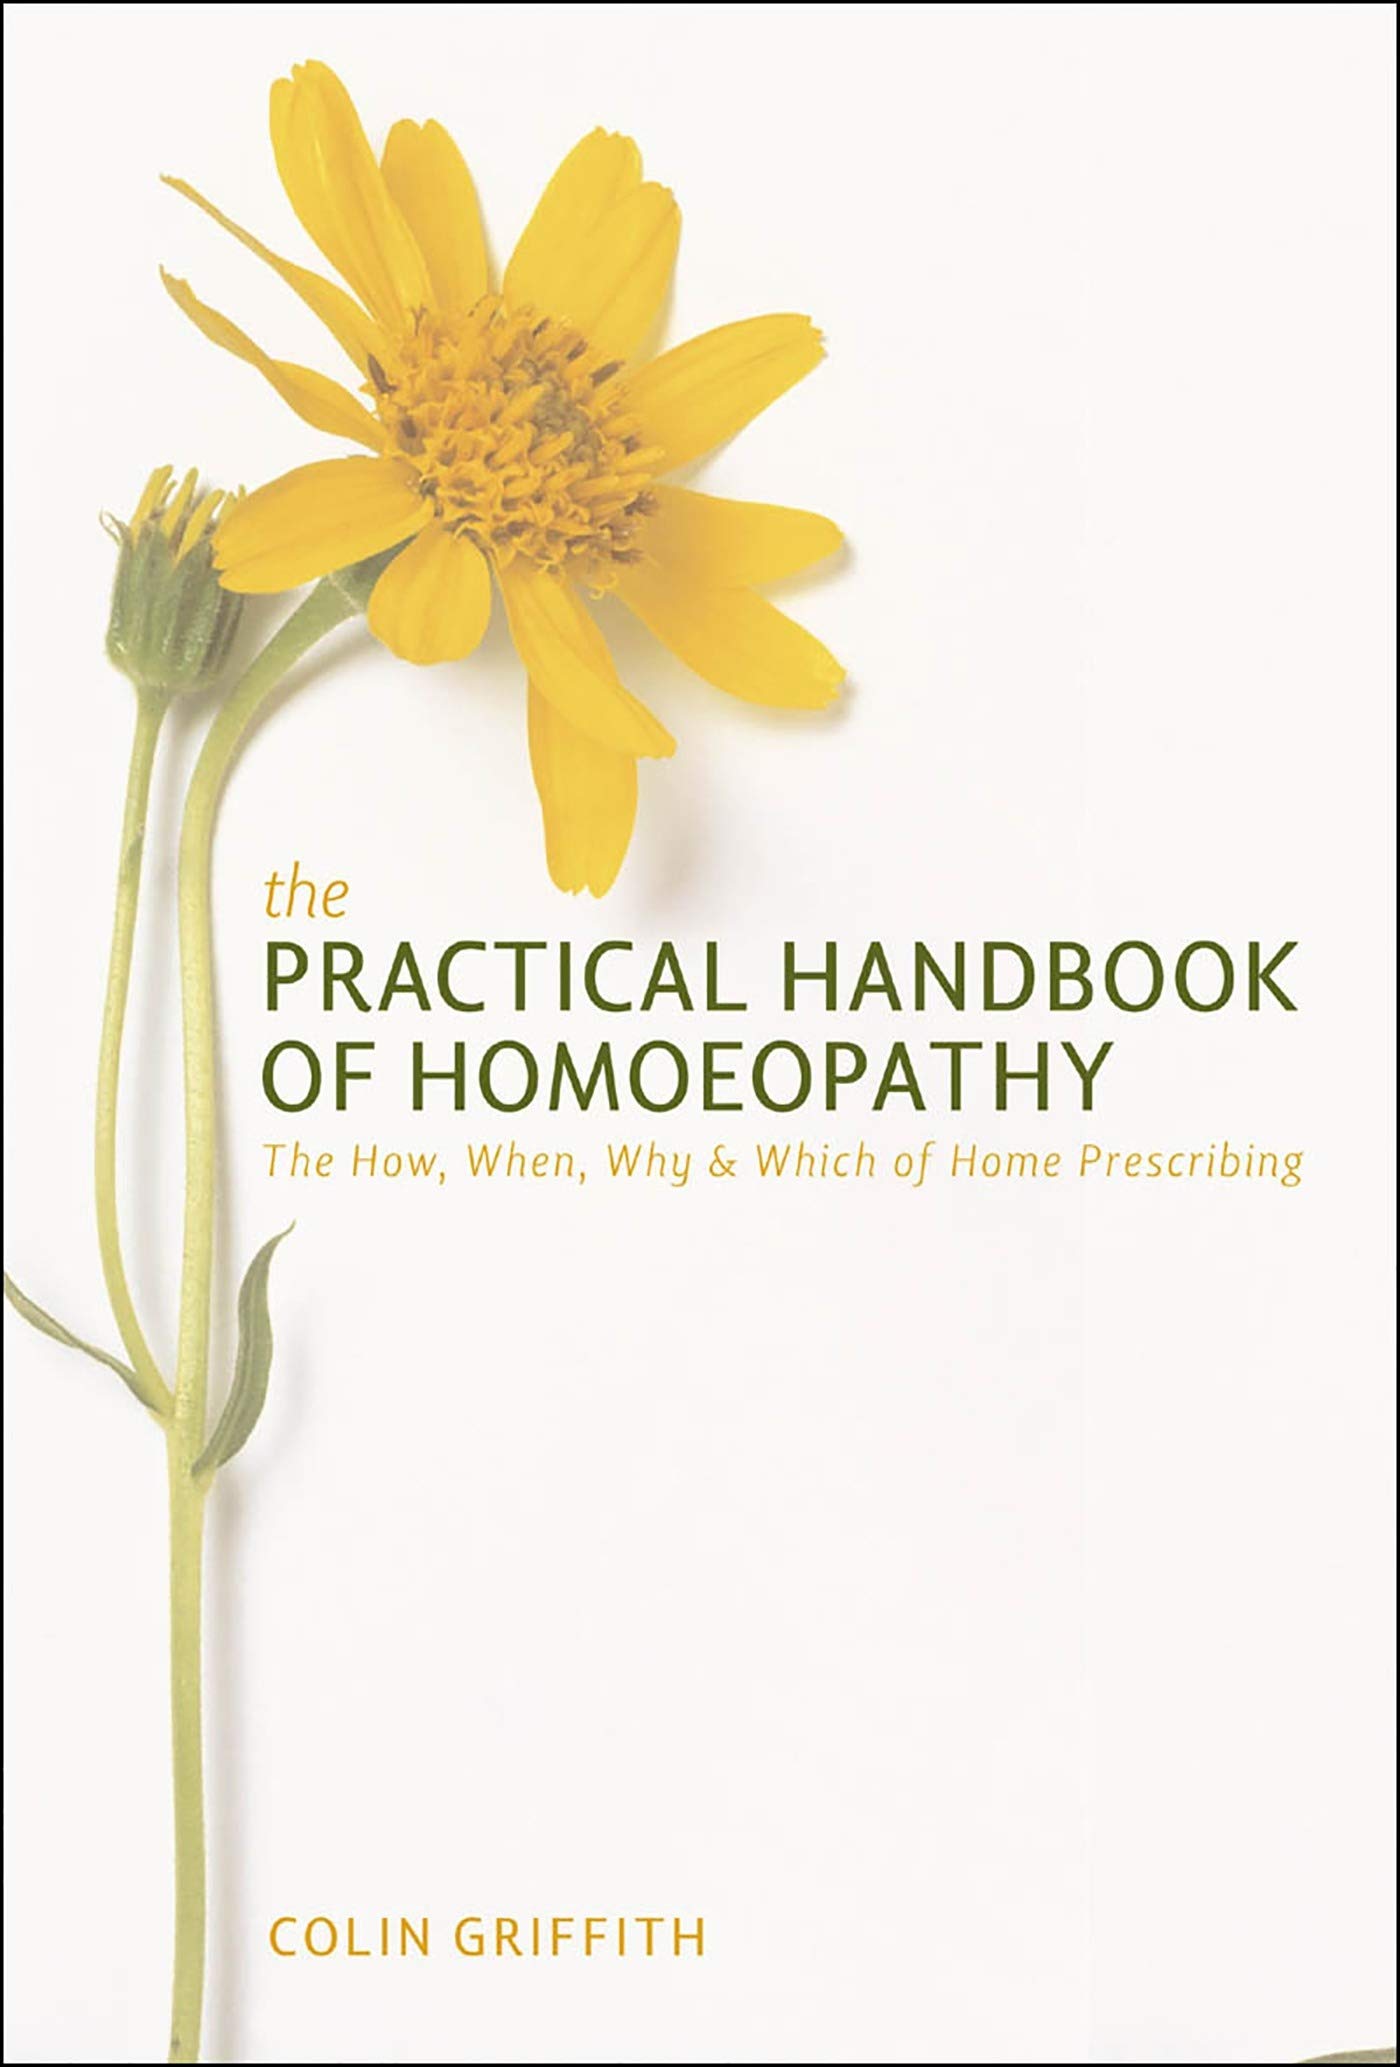 The Practical Handbook of Homoeopathy - Colin Griffith